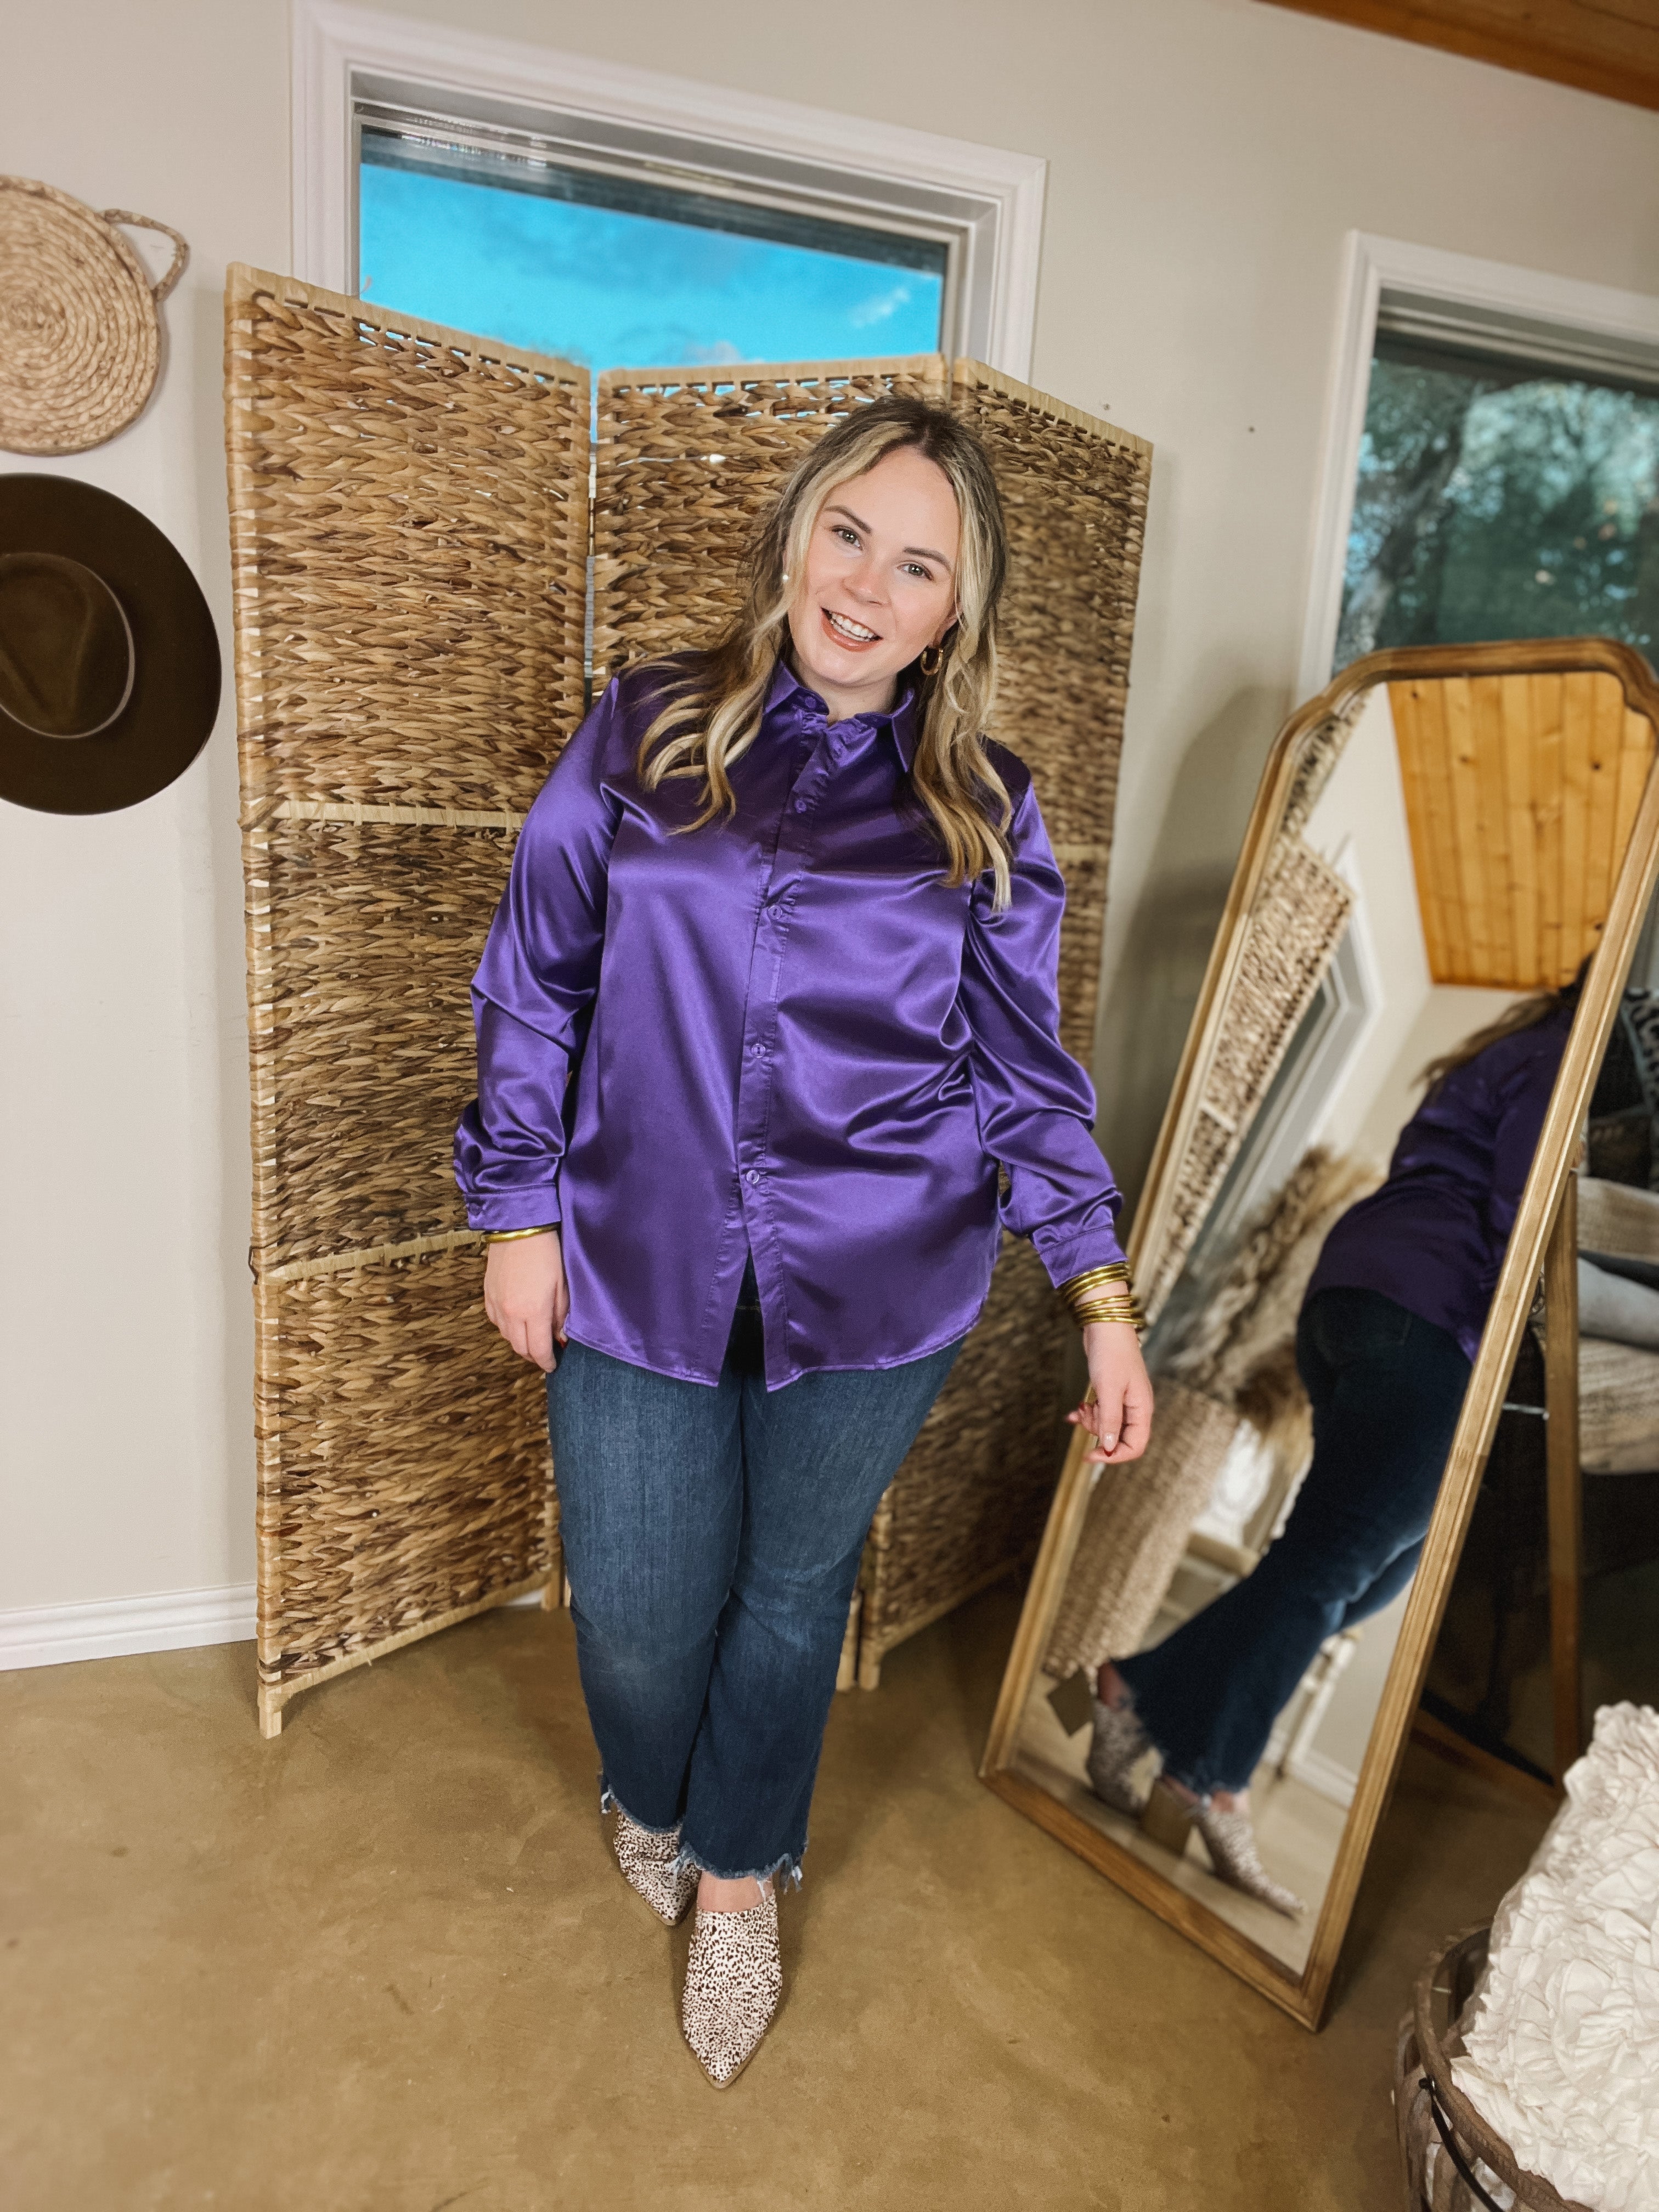 Down To Disco Satin Long Sleeve Button Up Top in Purple - Giddy Up Glamour Boutique